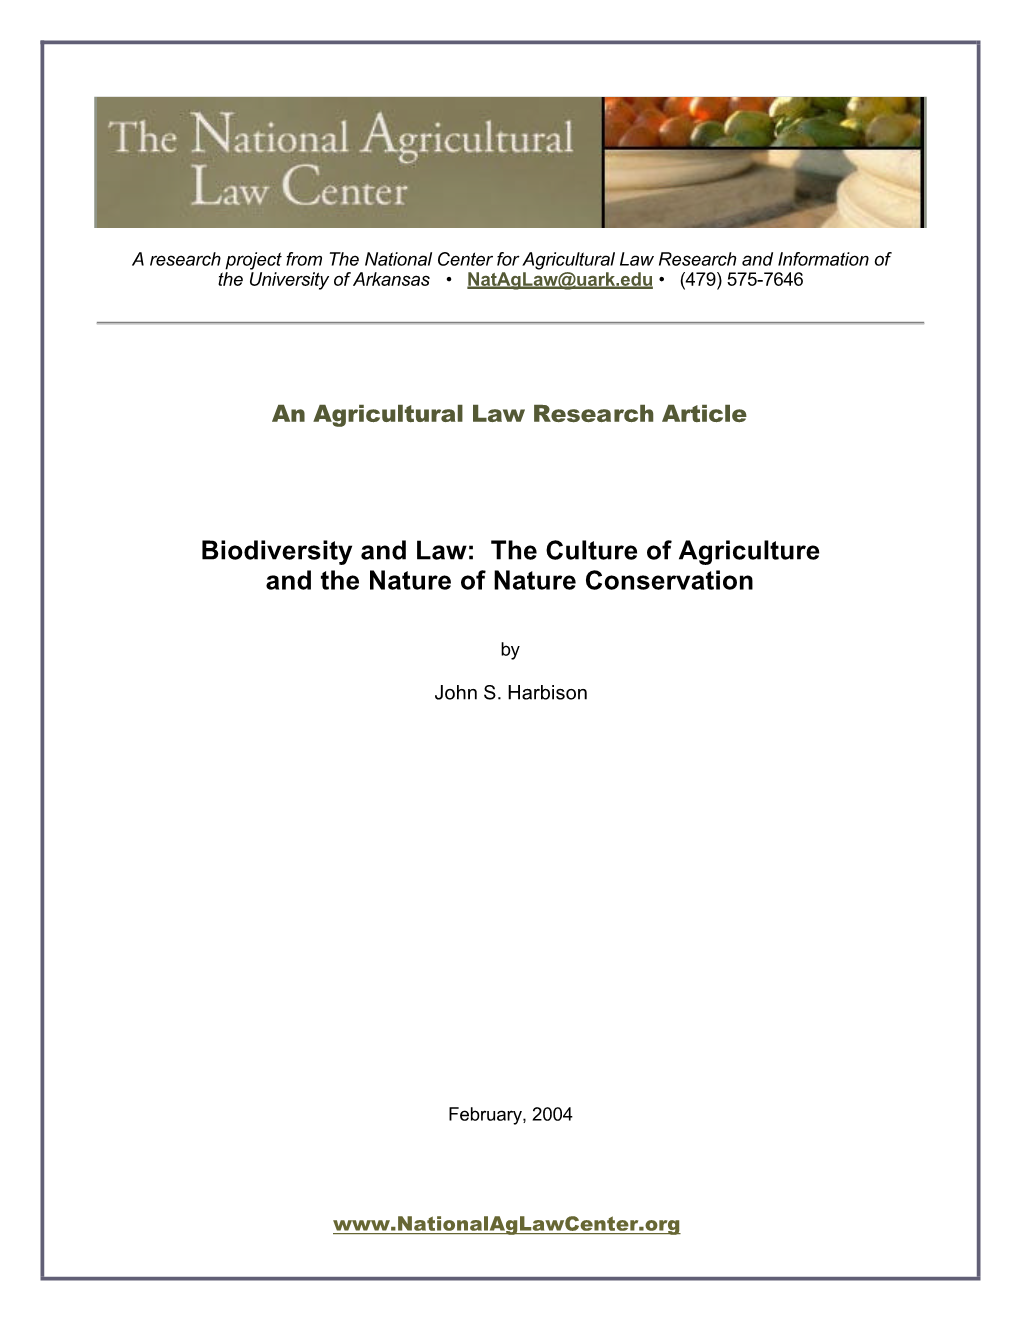 Biodiversity and Law: the Culture of Agriculture and the Nature of Nature Conservation